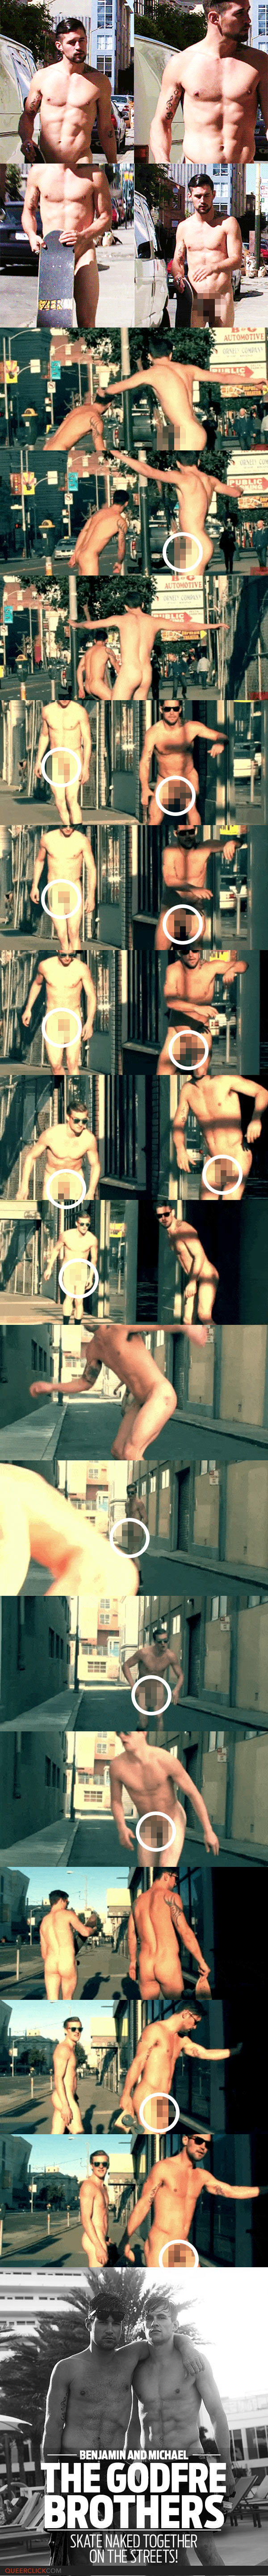 The Godfre Brothers, Benjamin And Michael, Skate Naked Together On The Streets!